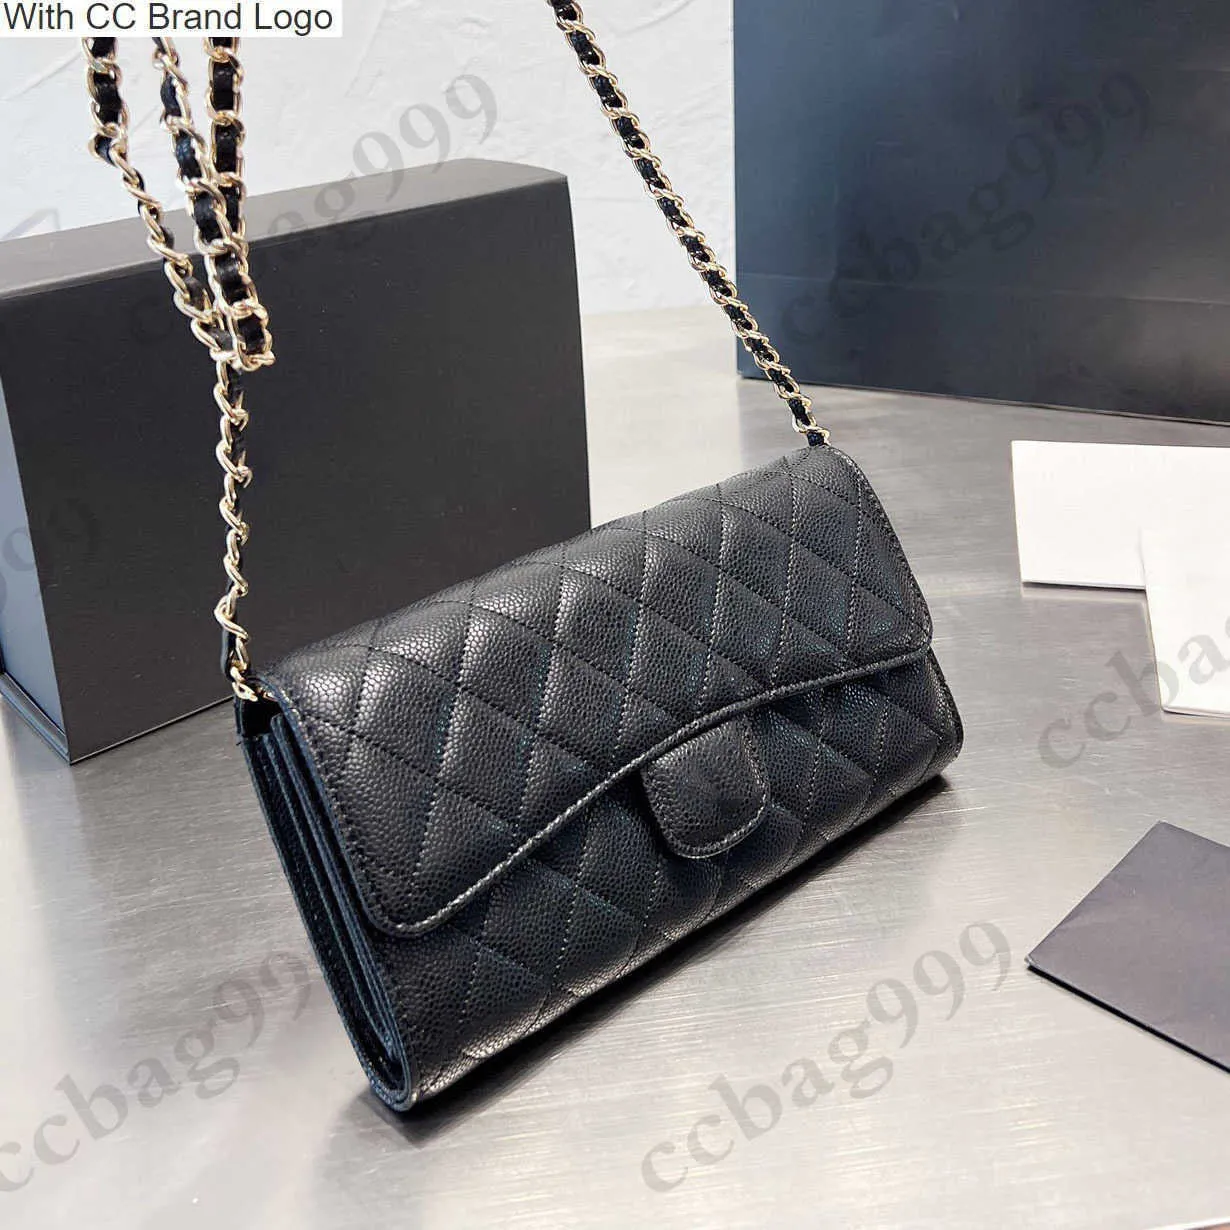 CC Brand Wallets Vintage Mini Flap Cowhide Wallets With Leather Hardware Chain Crossbody Bags Coins Purses Classic Quilted Caviar Womens Shoulder Phone Card Hol